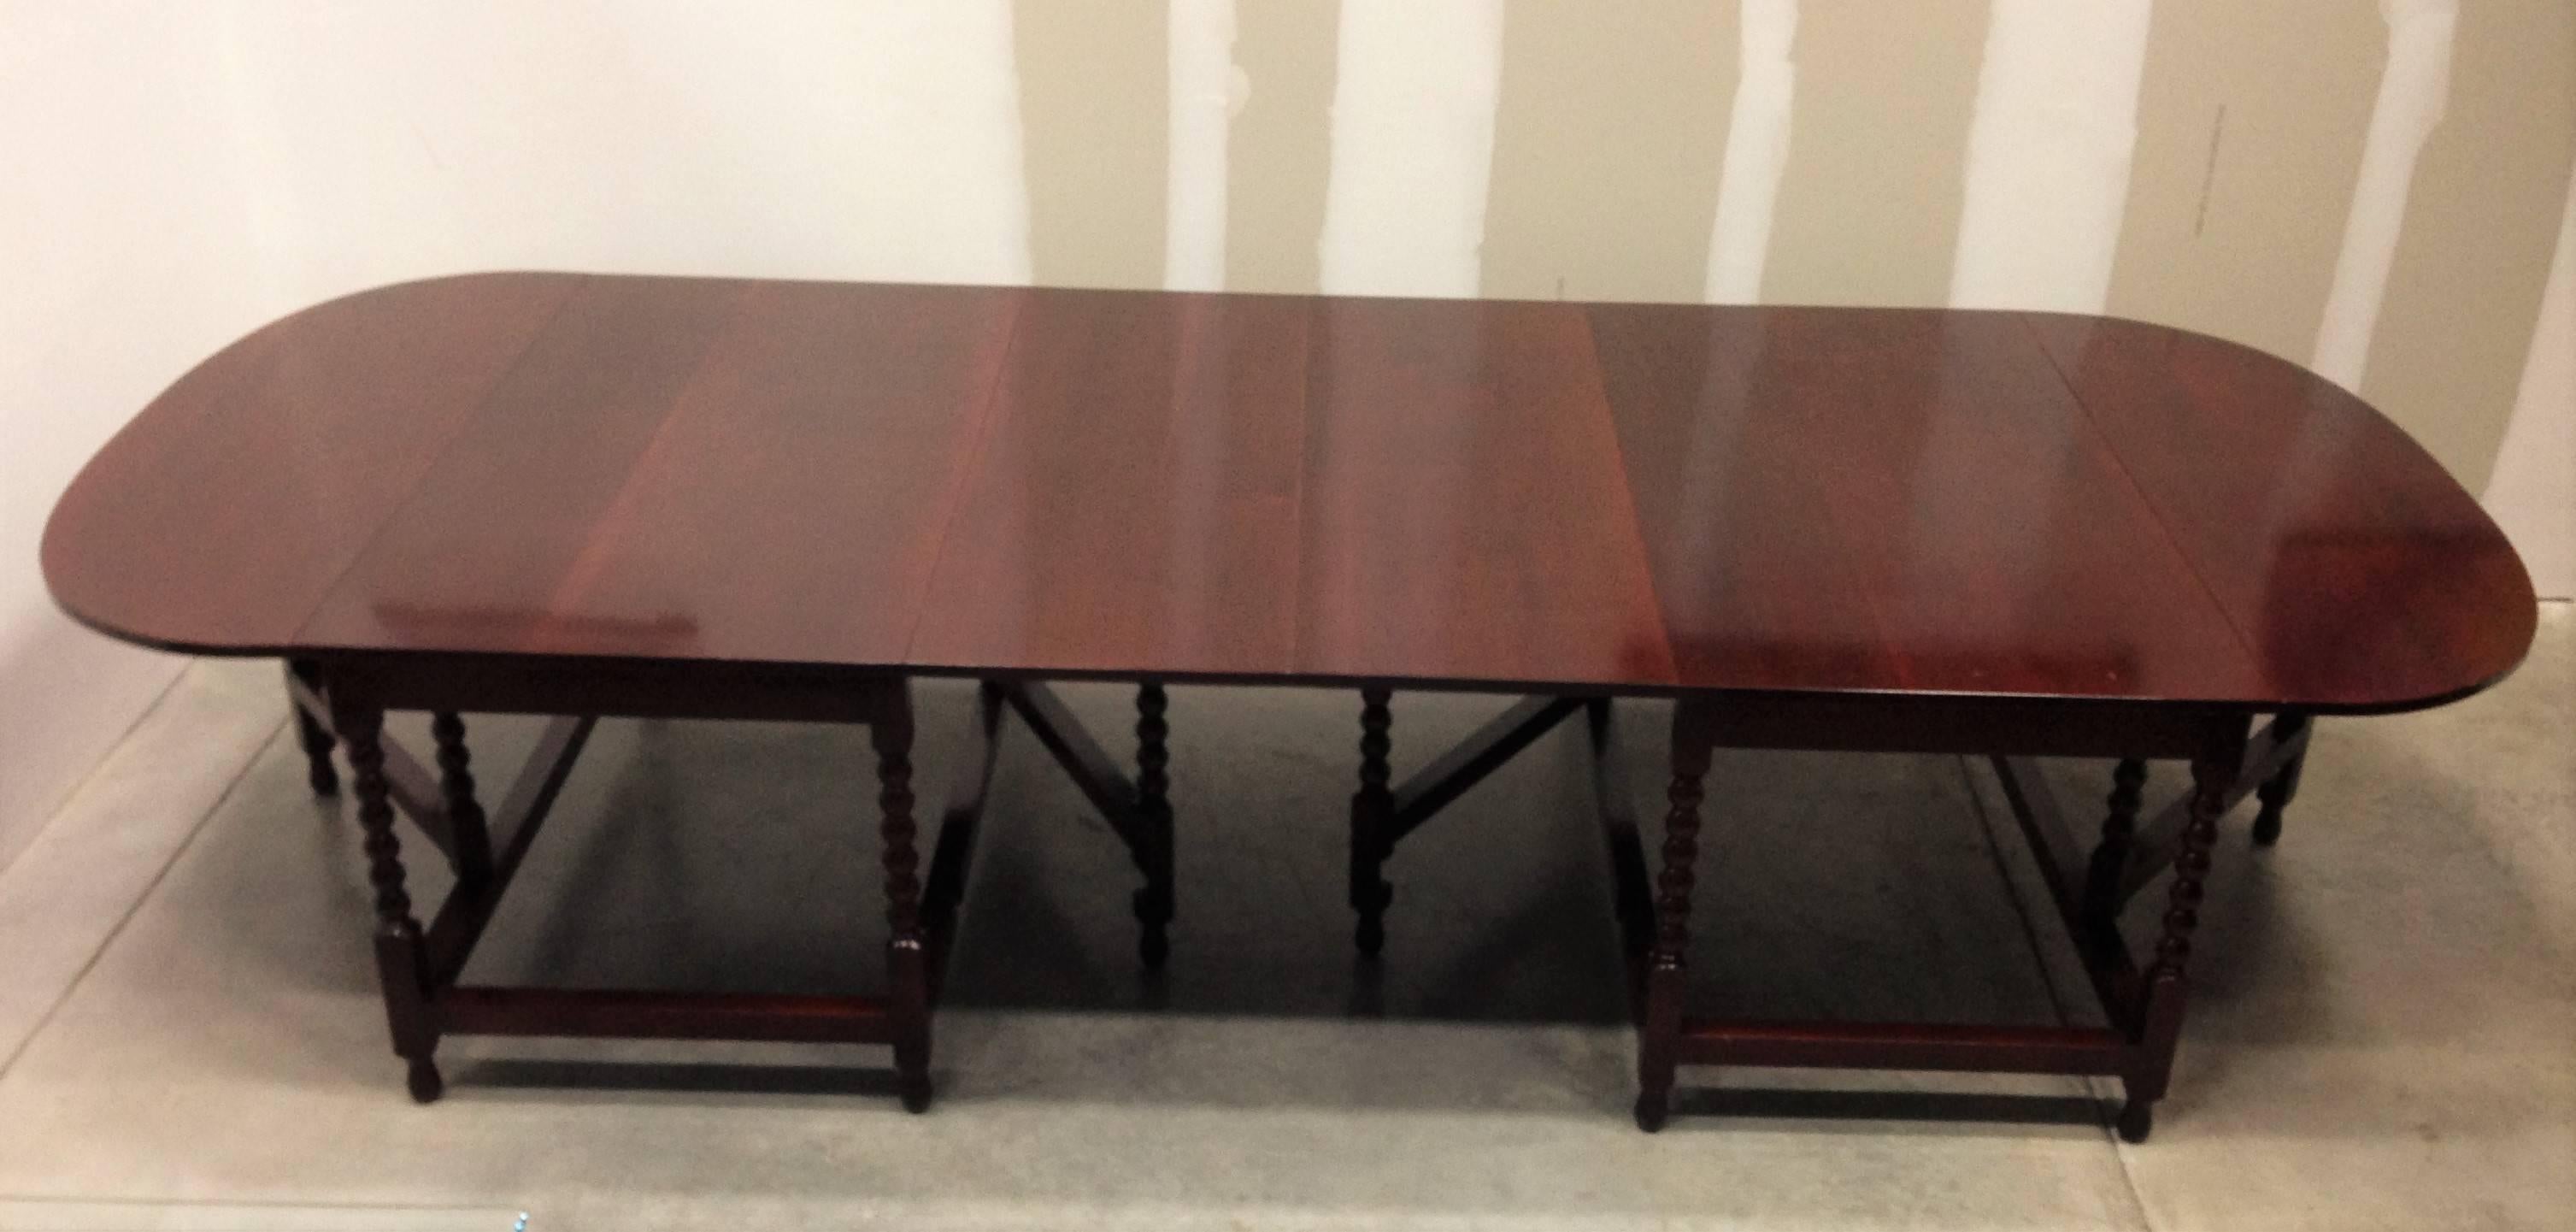 Late Regency Period Two-Part Dining Table or Conference Table in Mahogany In Excellent Condition For Sale In Miami, FL